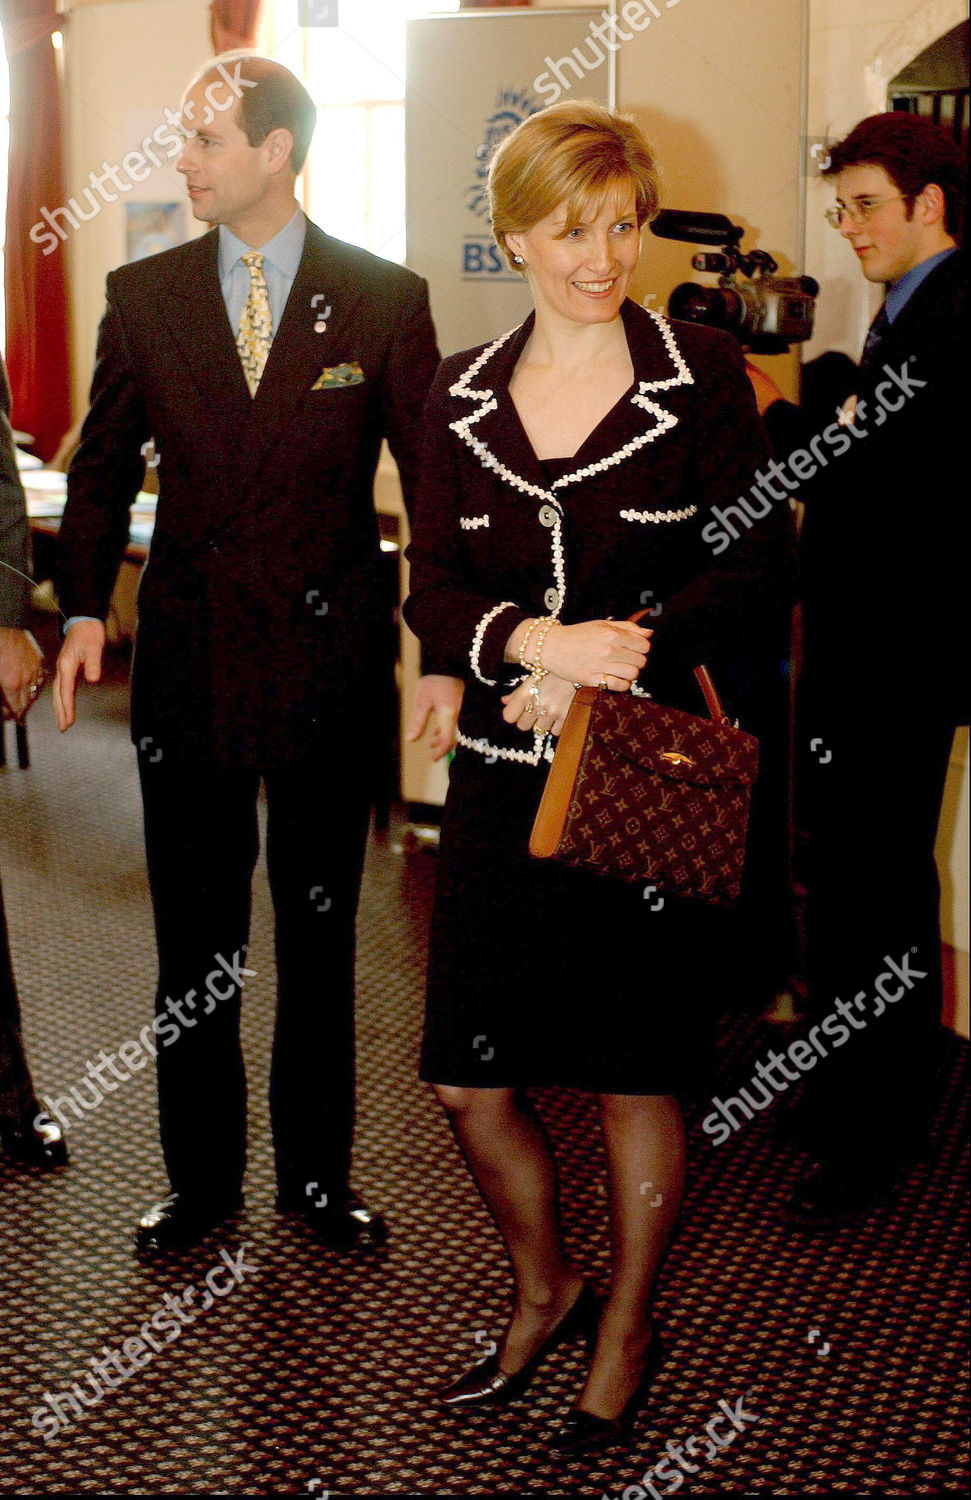 prince-edward-and-sophie-countess-of-wessex-at-the-duke-of-edinburghs-award-in-weston-super-mare-britain-shutterstock-editorial-377905b.jpg